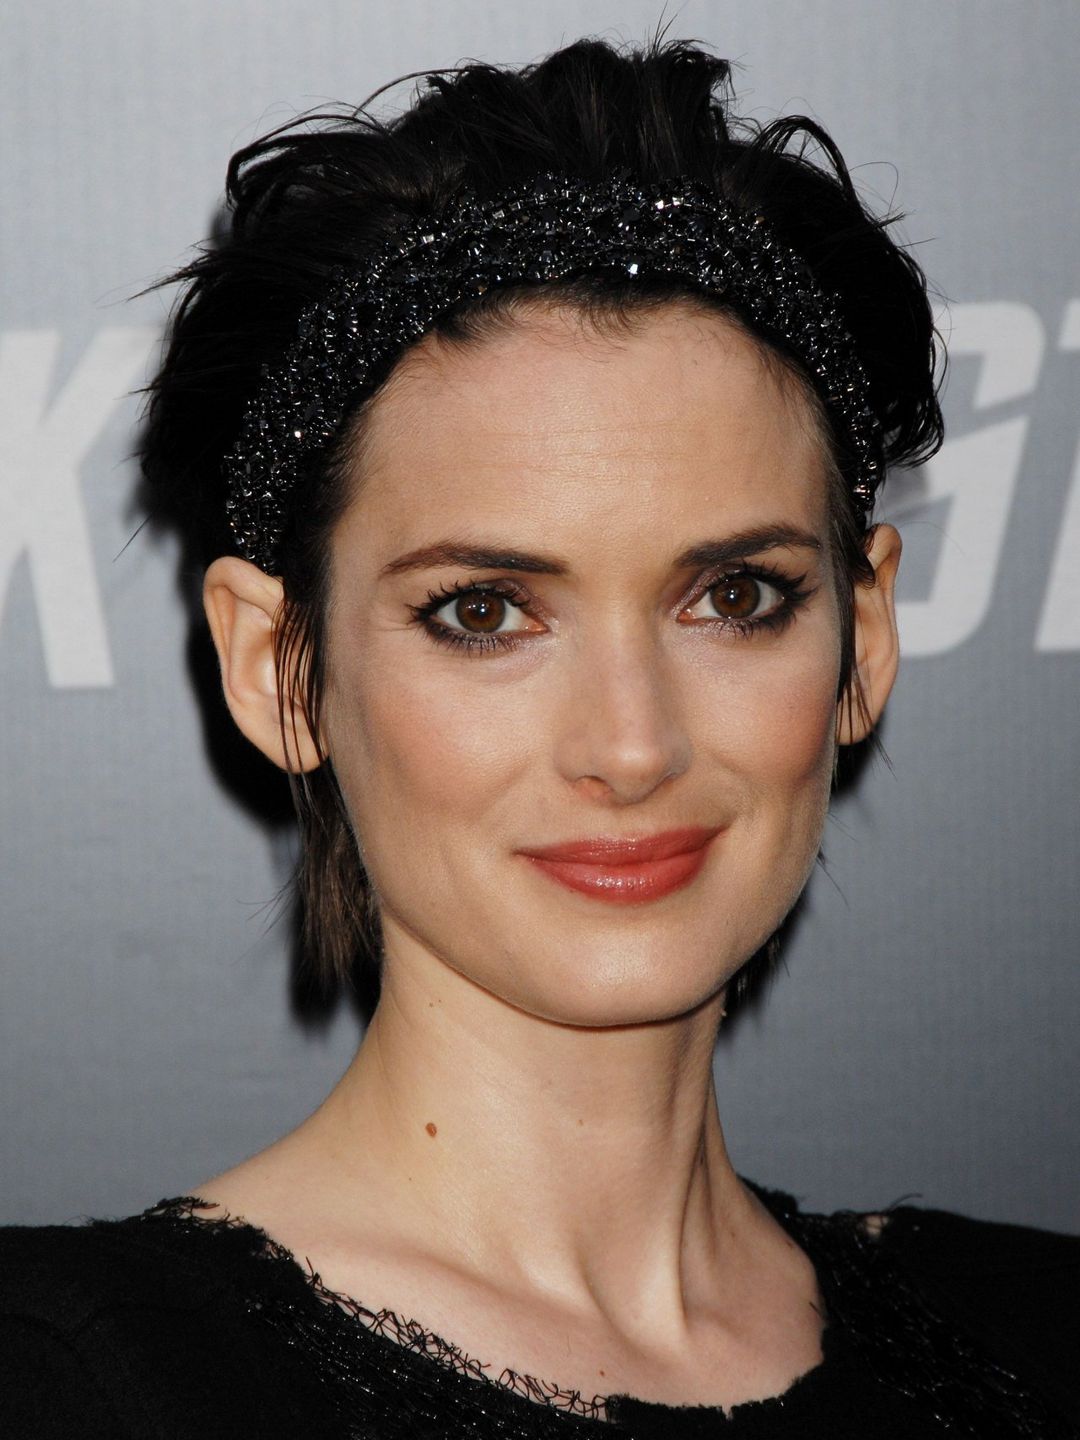 Winona Ryder where is she now